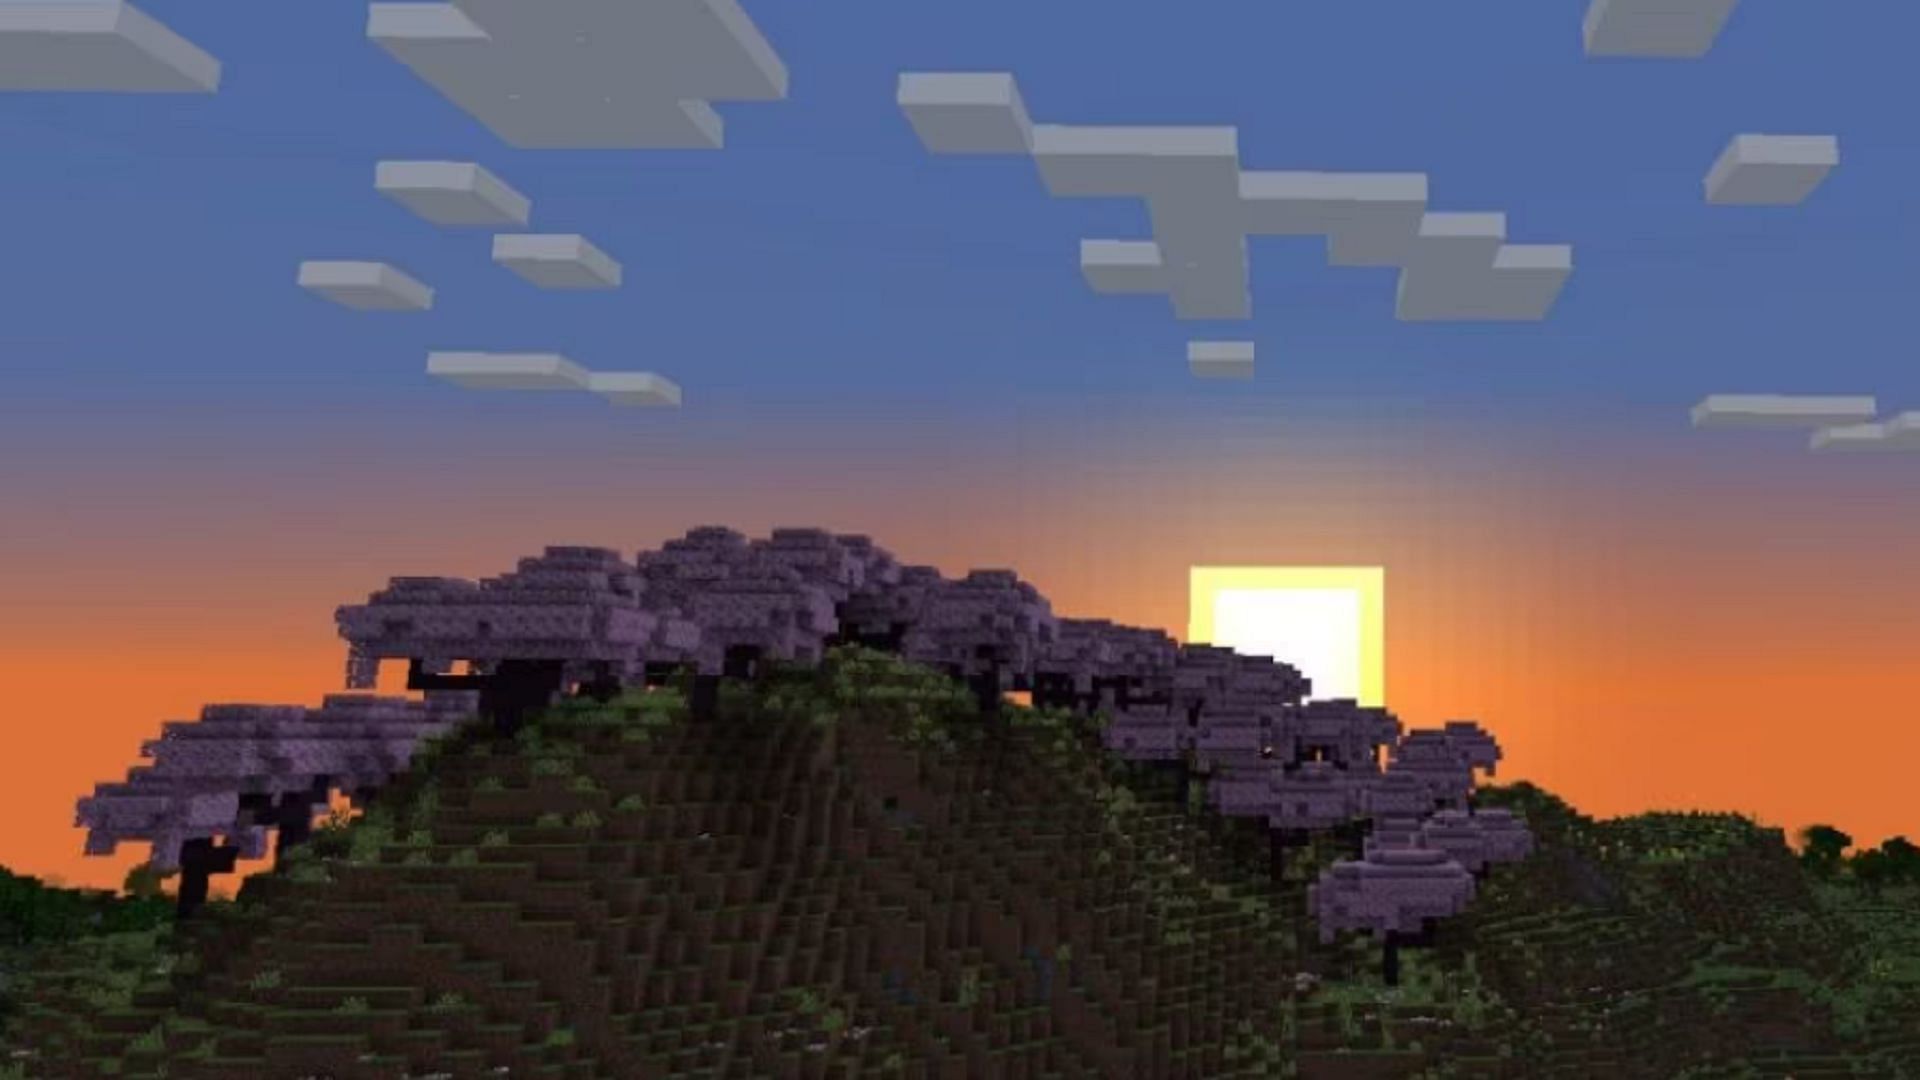 Minecraft announces new Cherry Blossom biome for 1.20 update